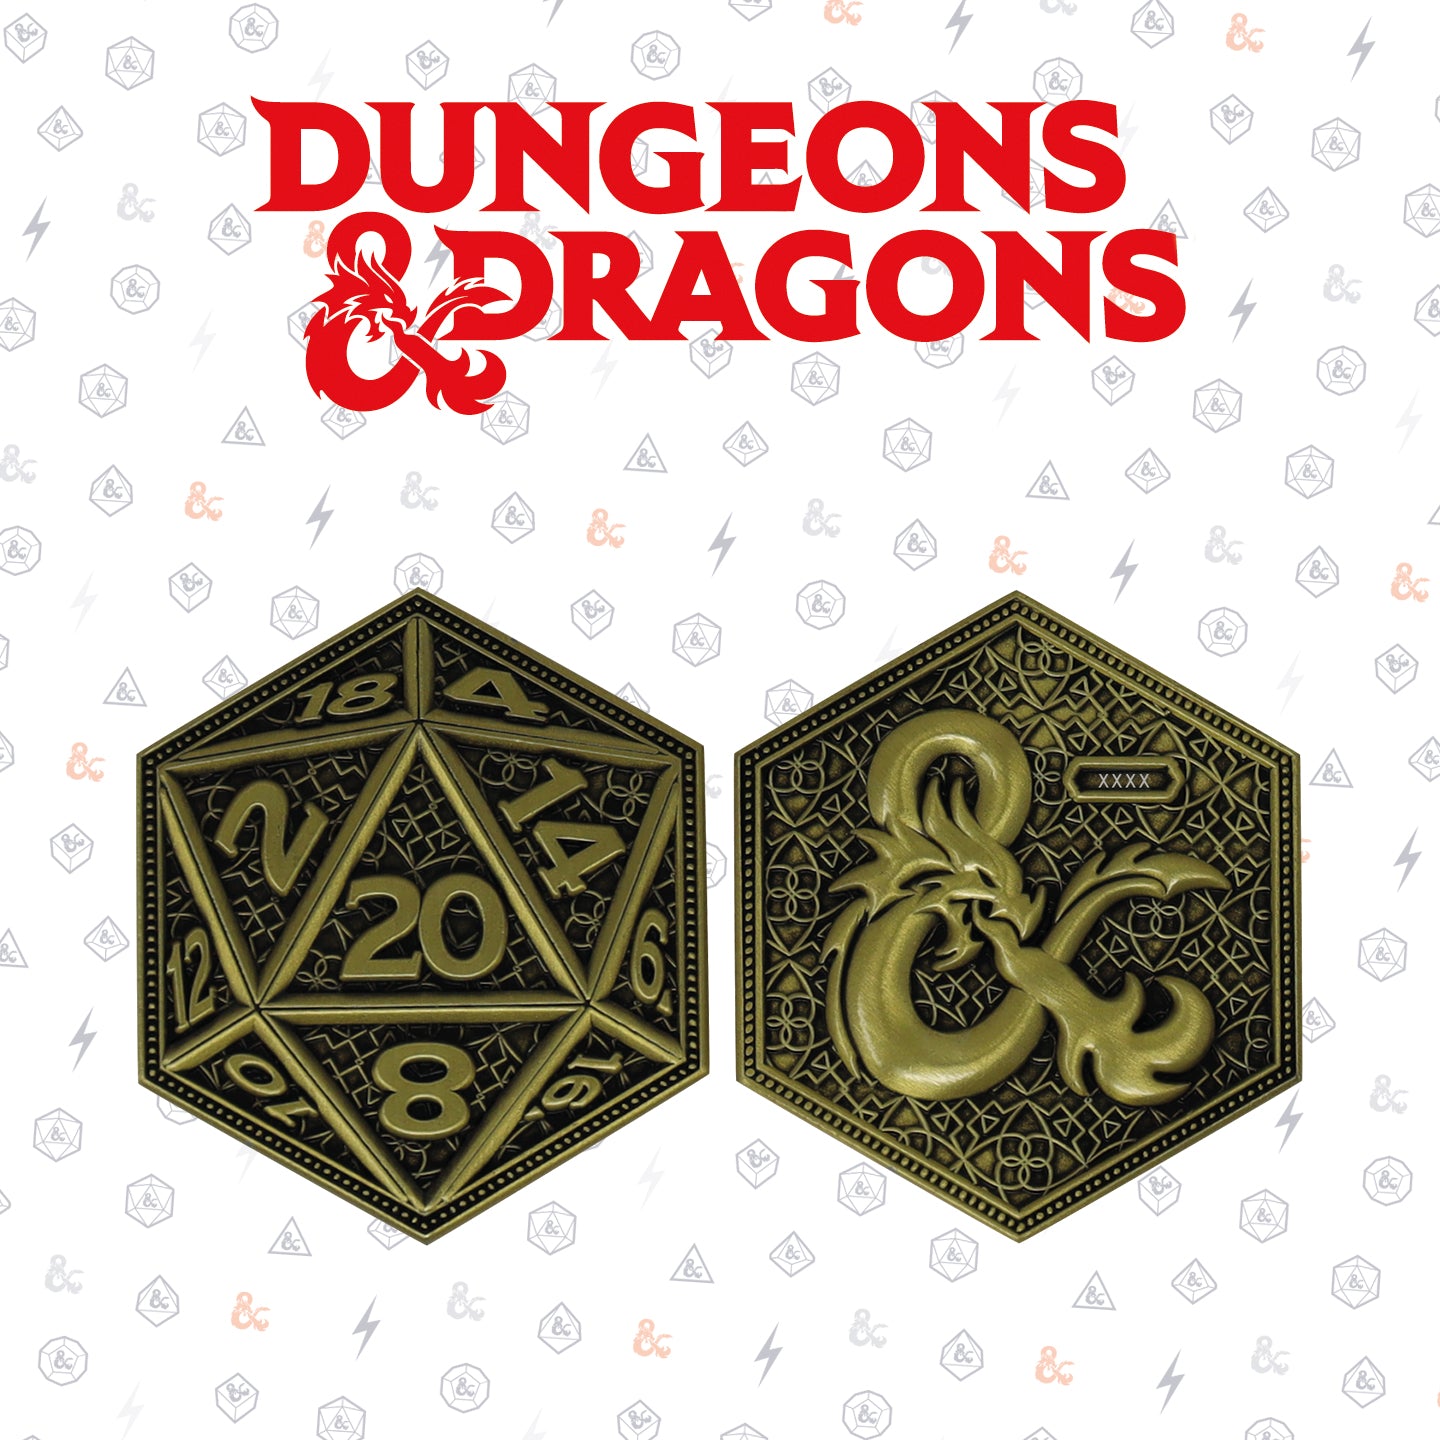 Dungeons & Dragons Limited Edition Collectible Coin